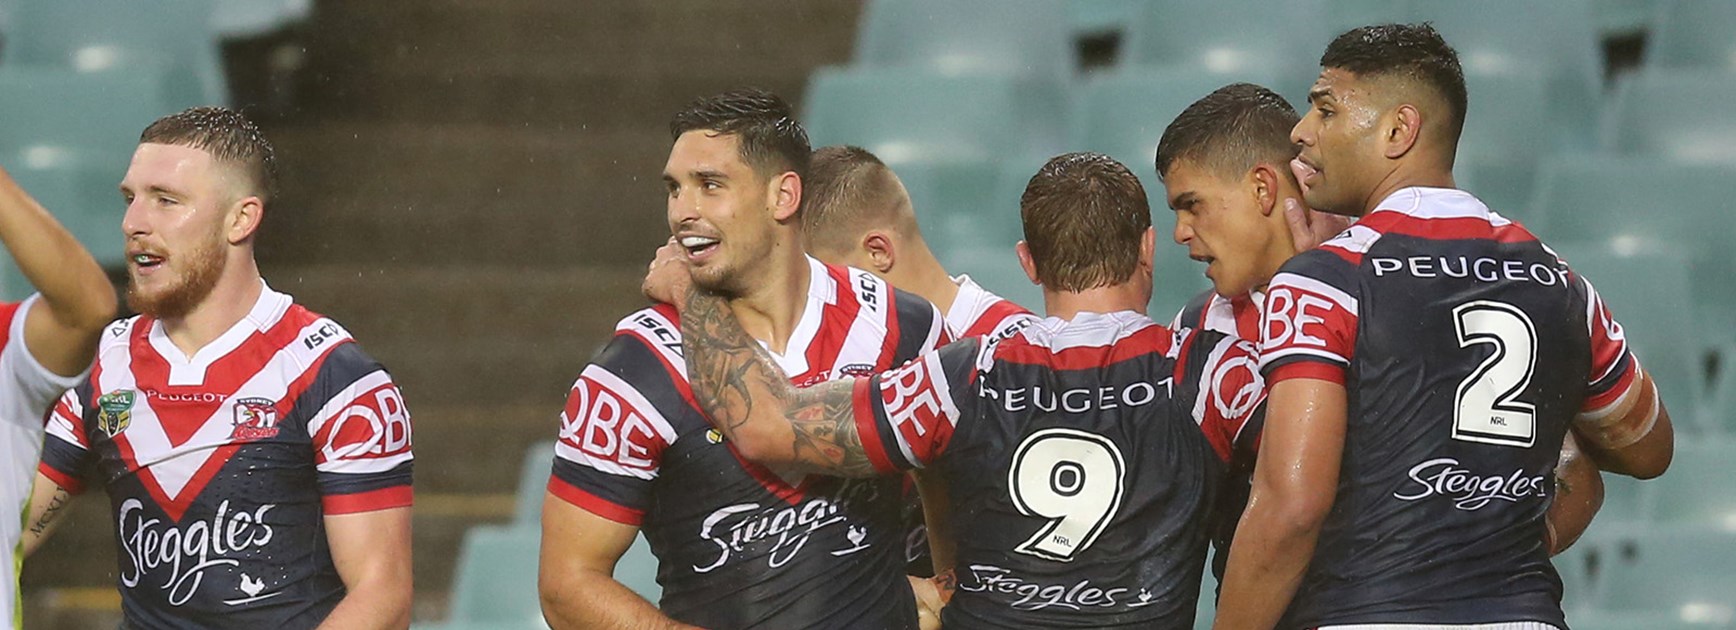 The Roosters celebrate a try against the Wests Tigers.